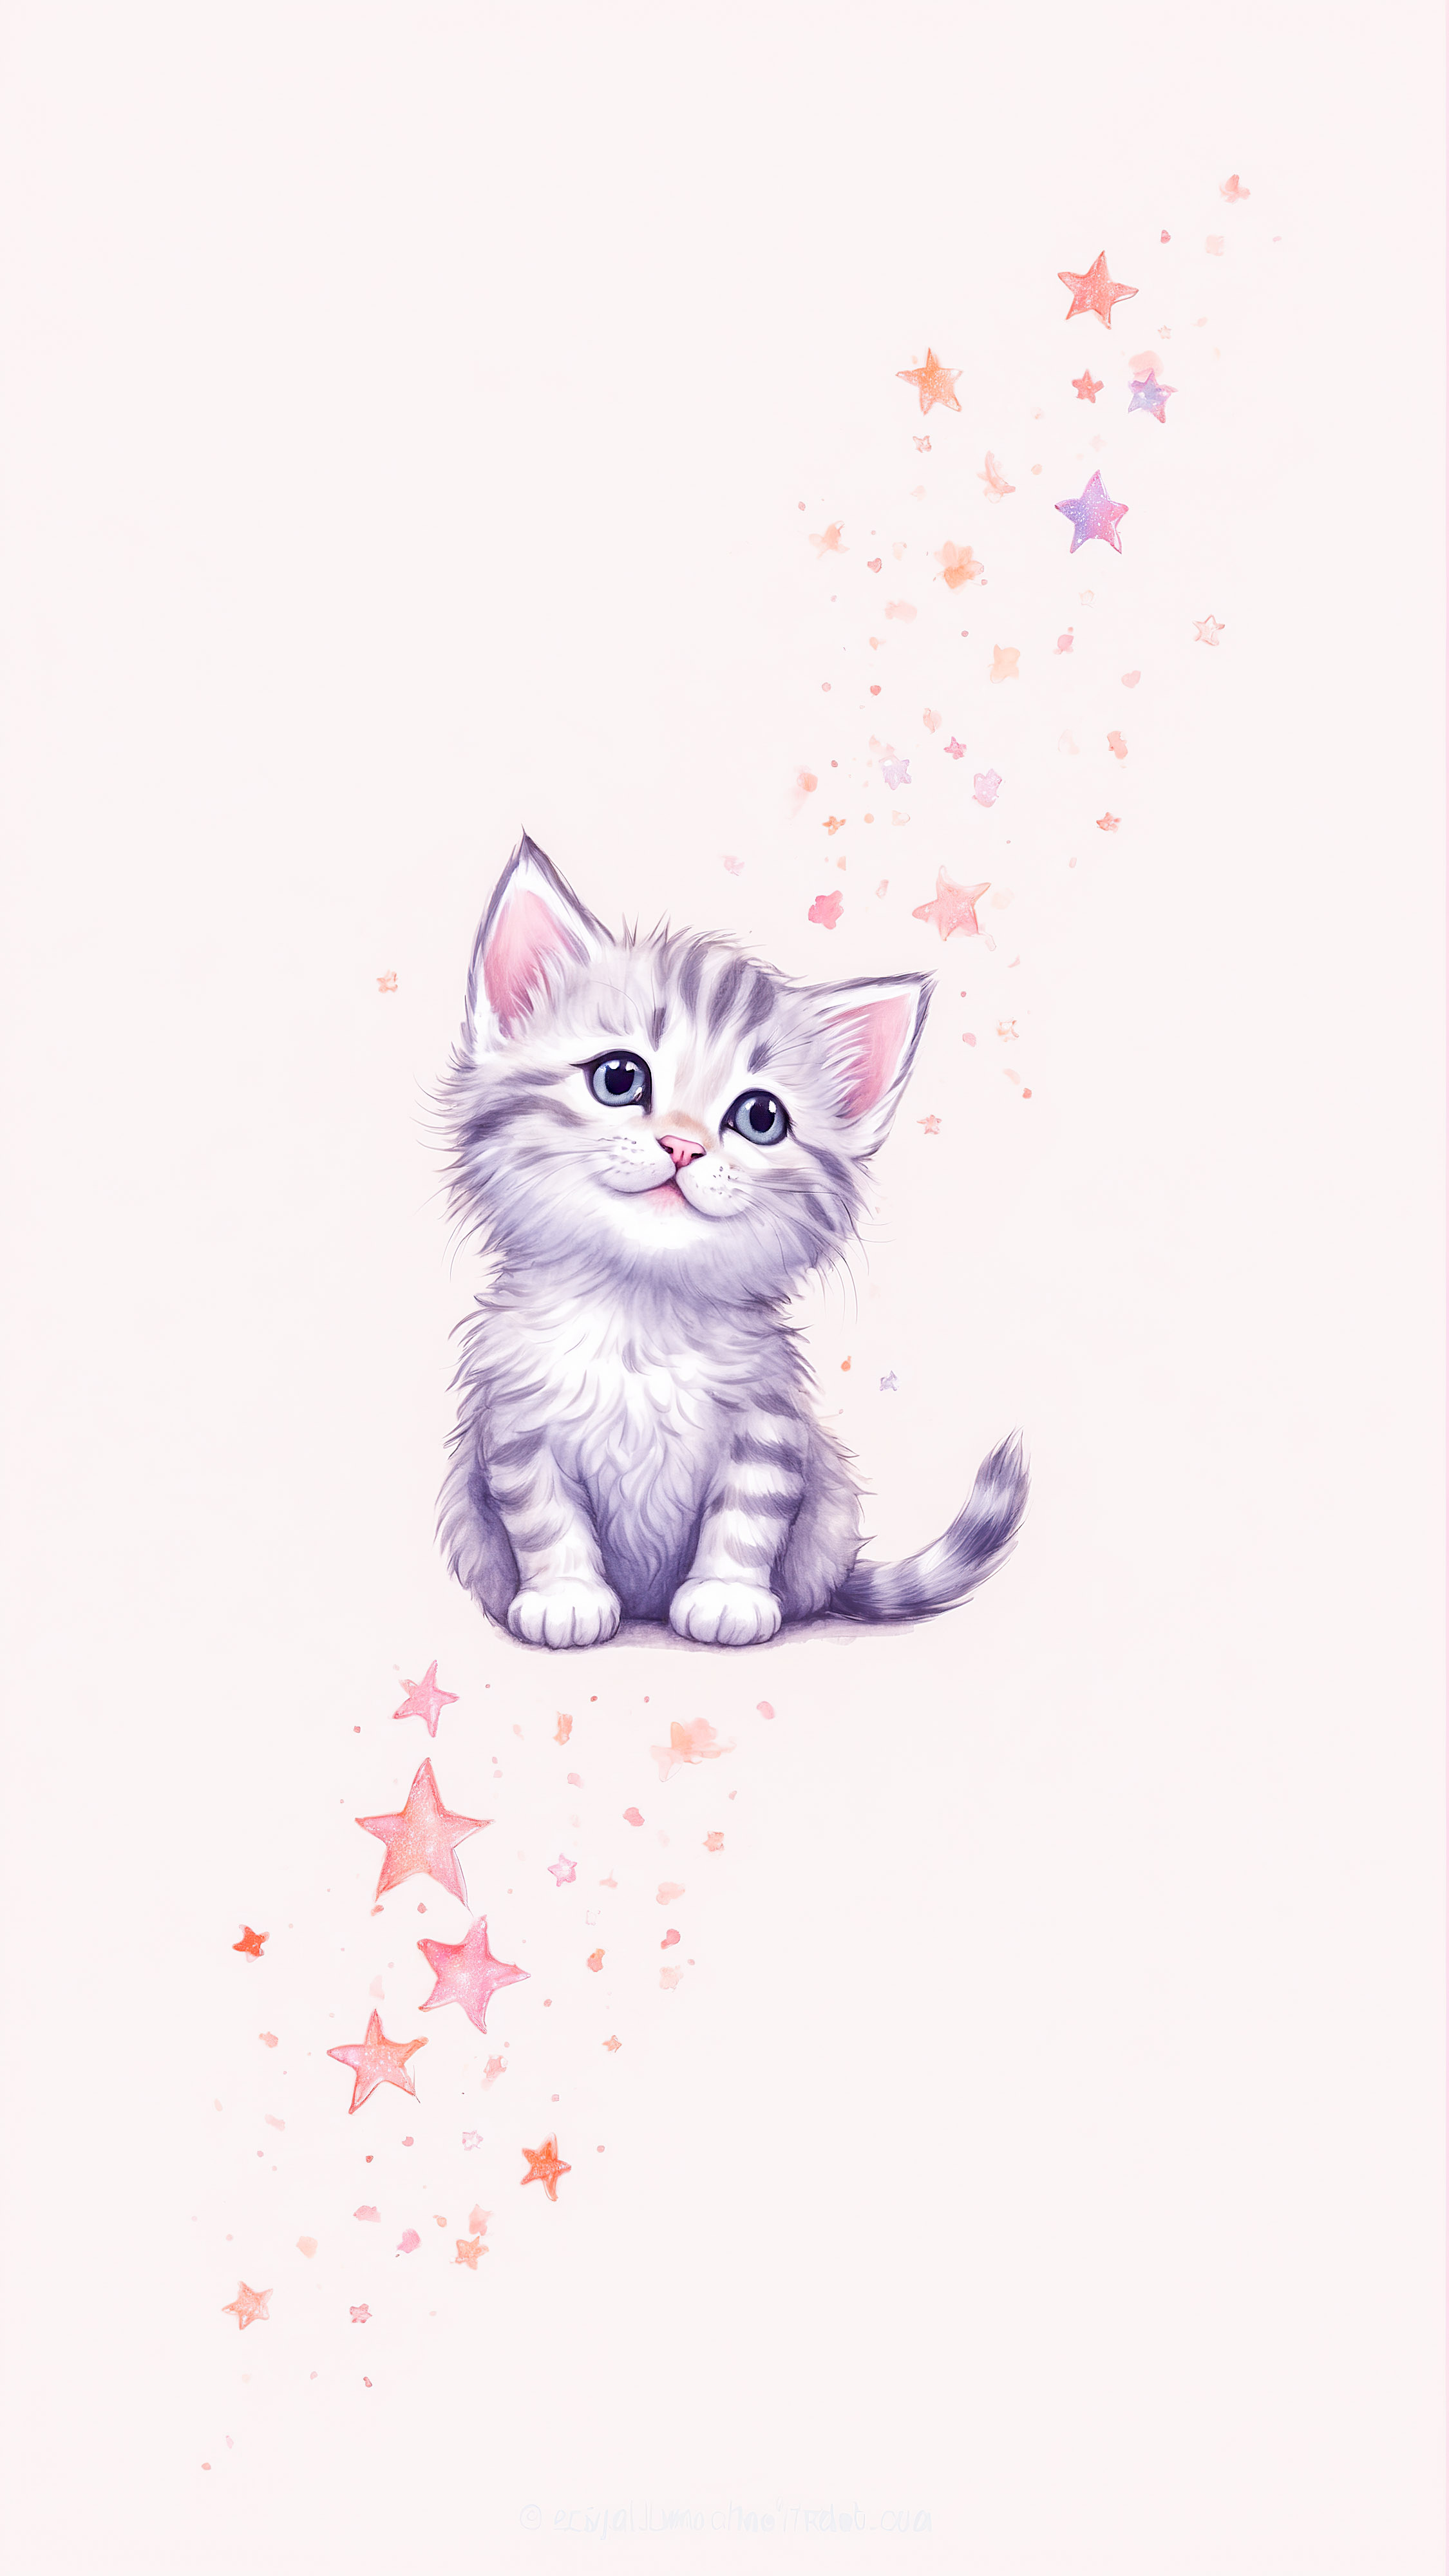 Experience the joy of a kitten surrounded by sparkling stars, through a girly lock screen wallpaper for your iPhone.